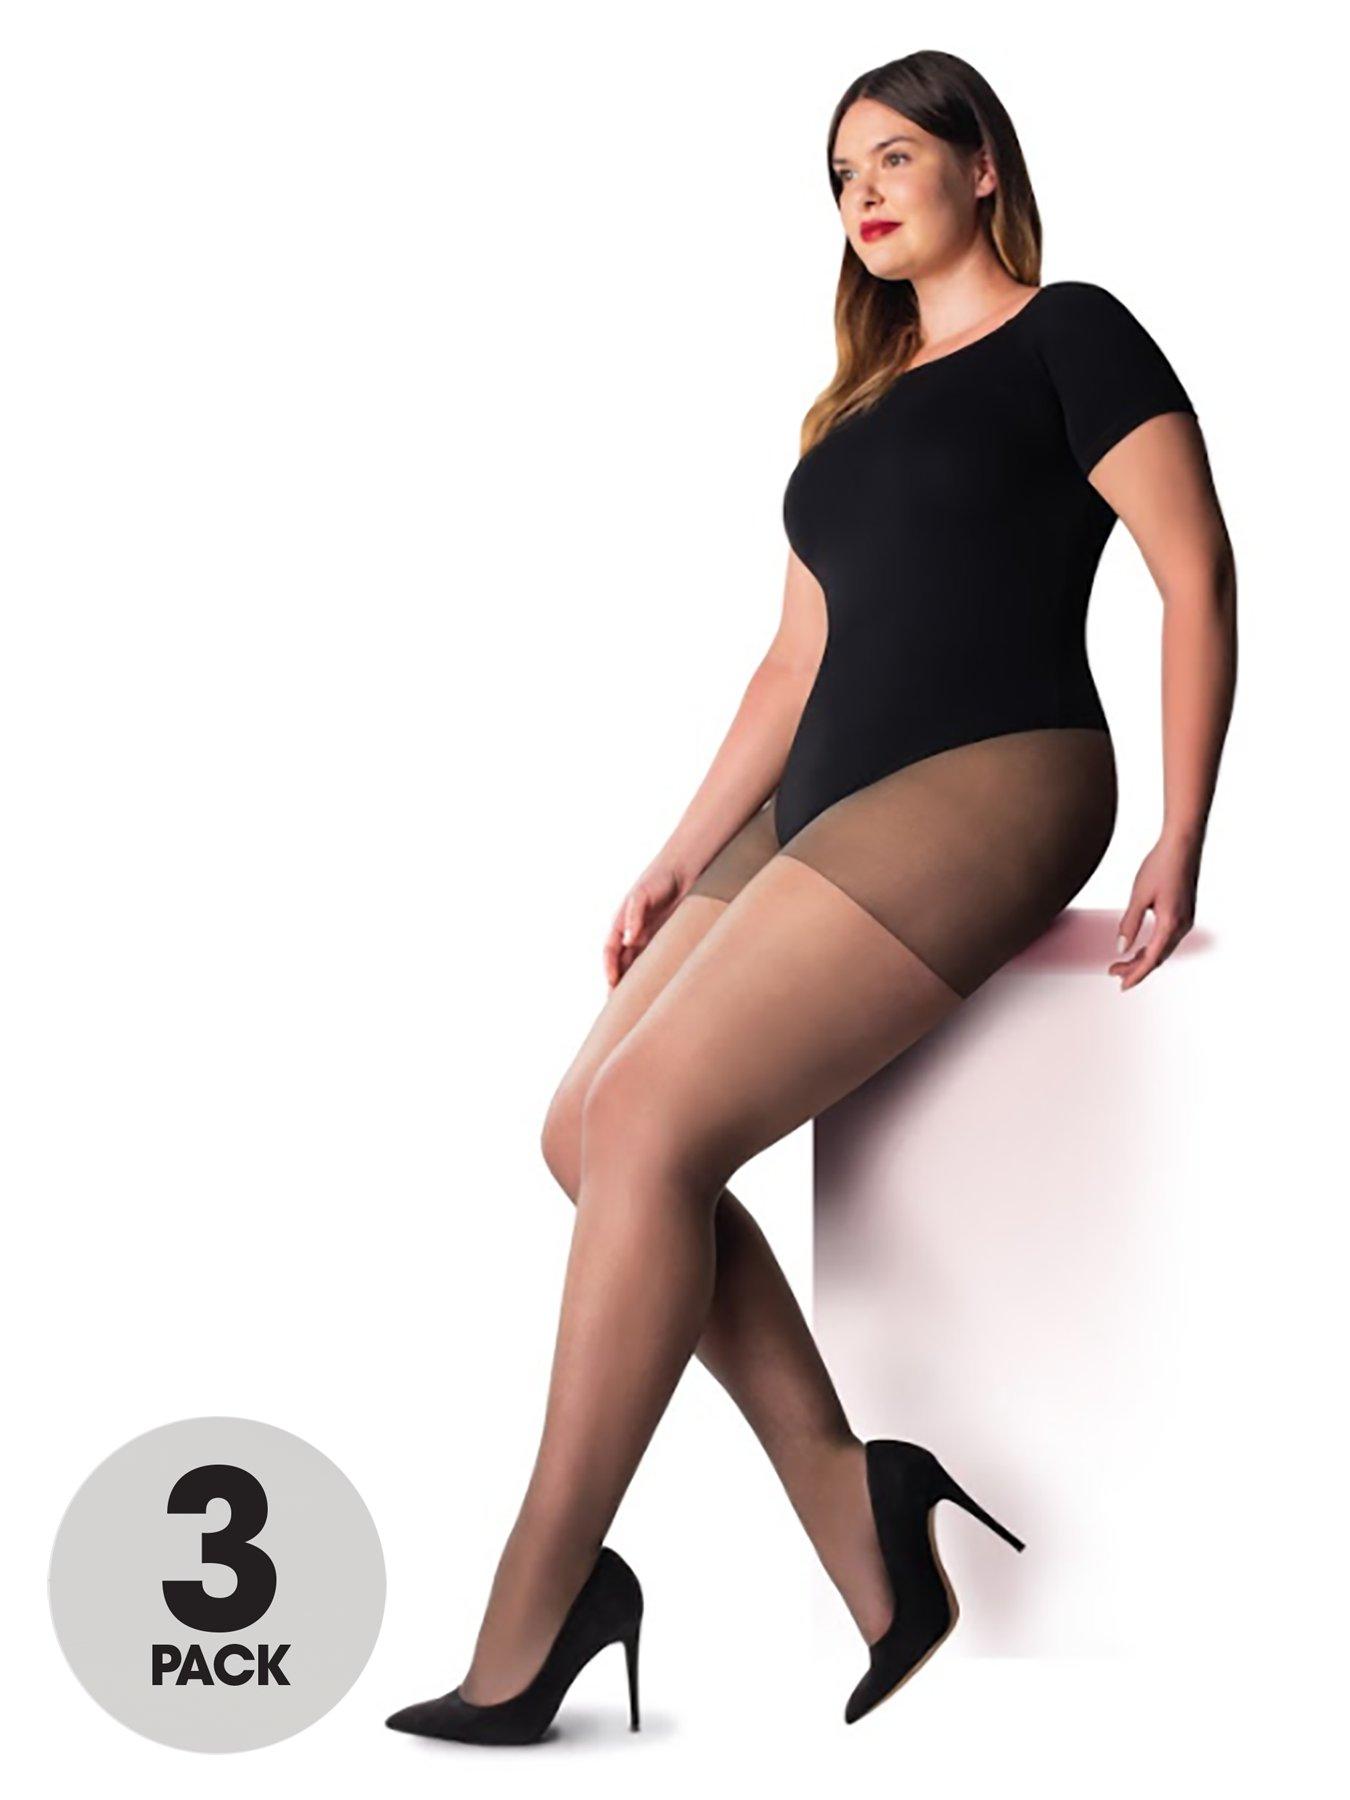 Hosiery For Men: New Eco-Wear Tights and Leggings from Pretty Polly